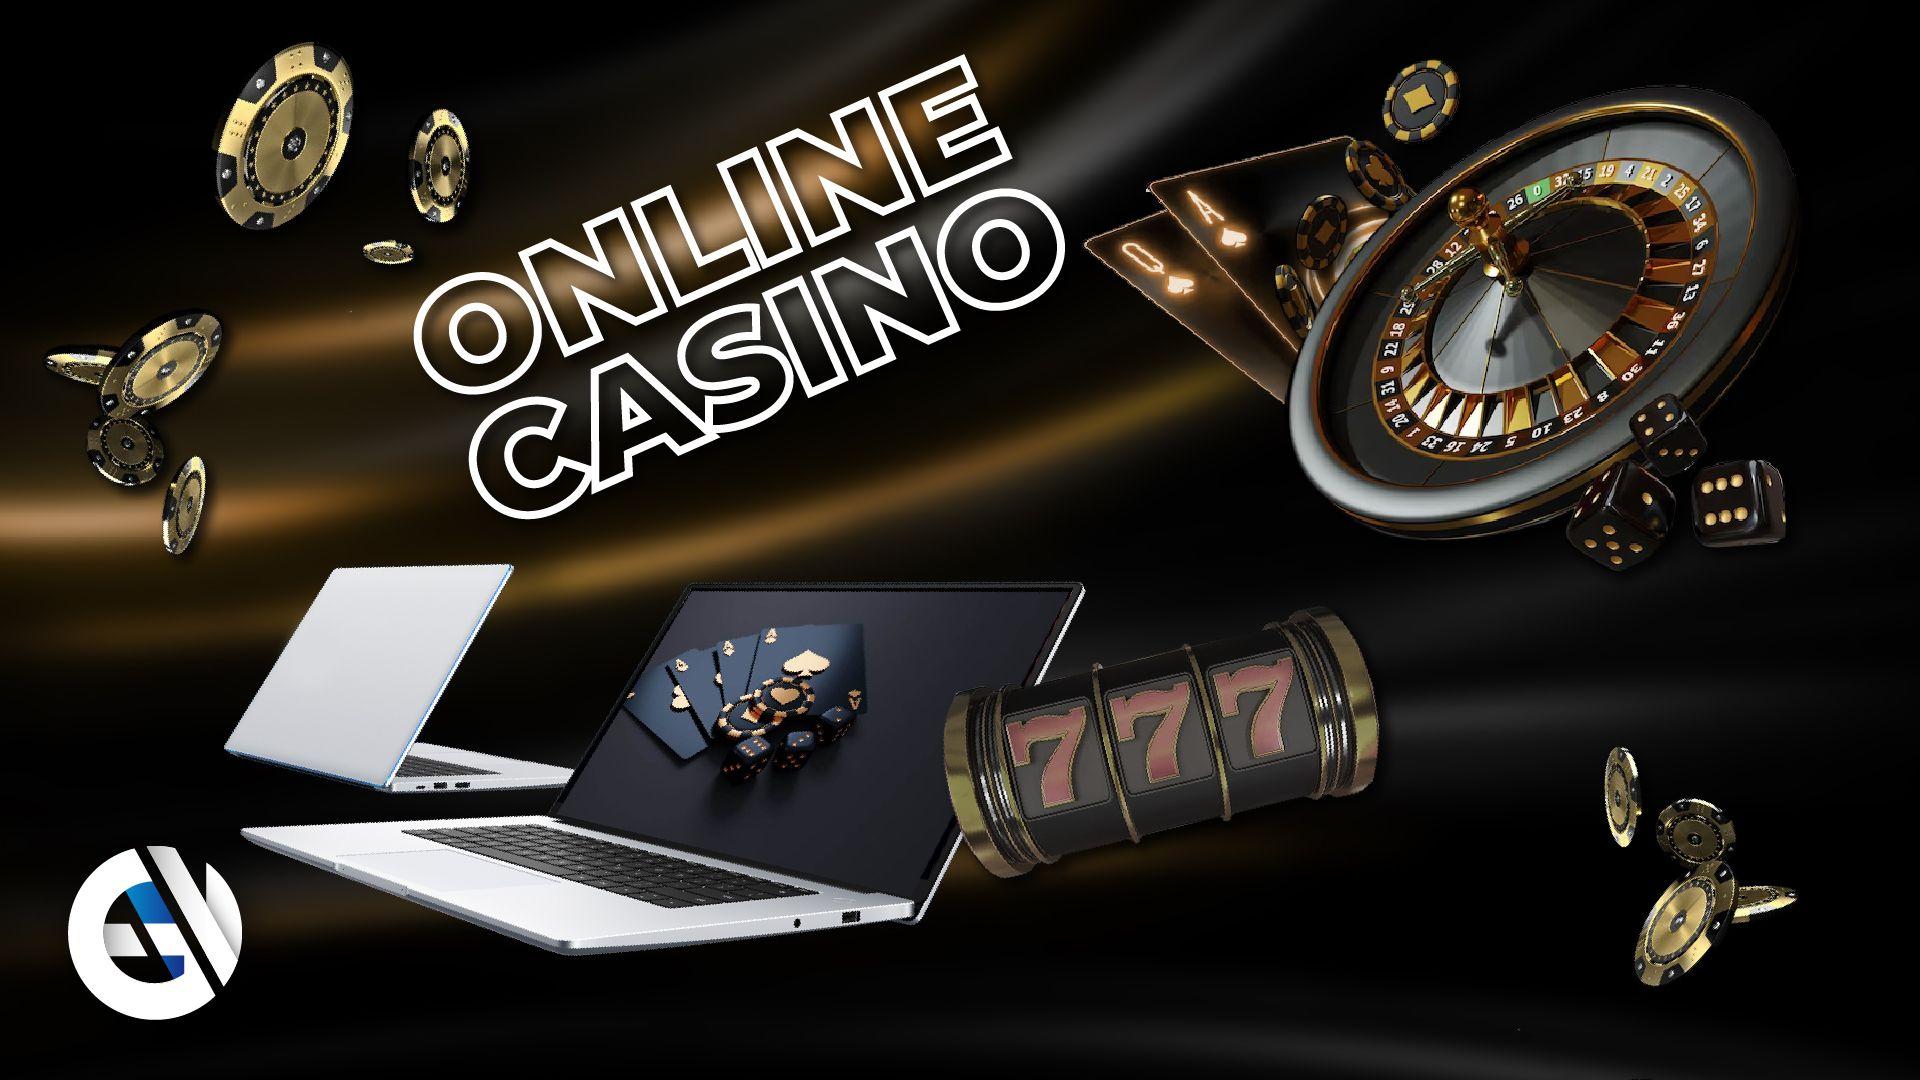 Ensuring Your Security In The World Of Online Casinos: A Practical Guide For Responsible Players